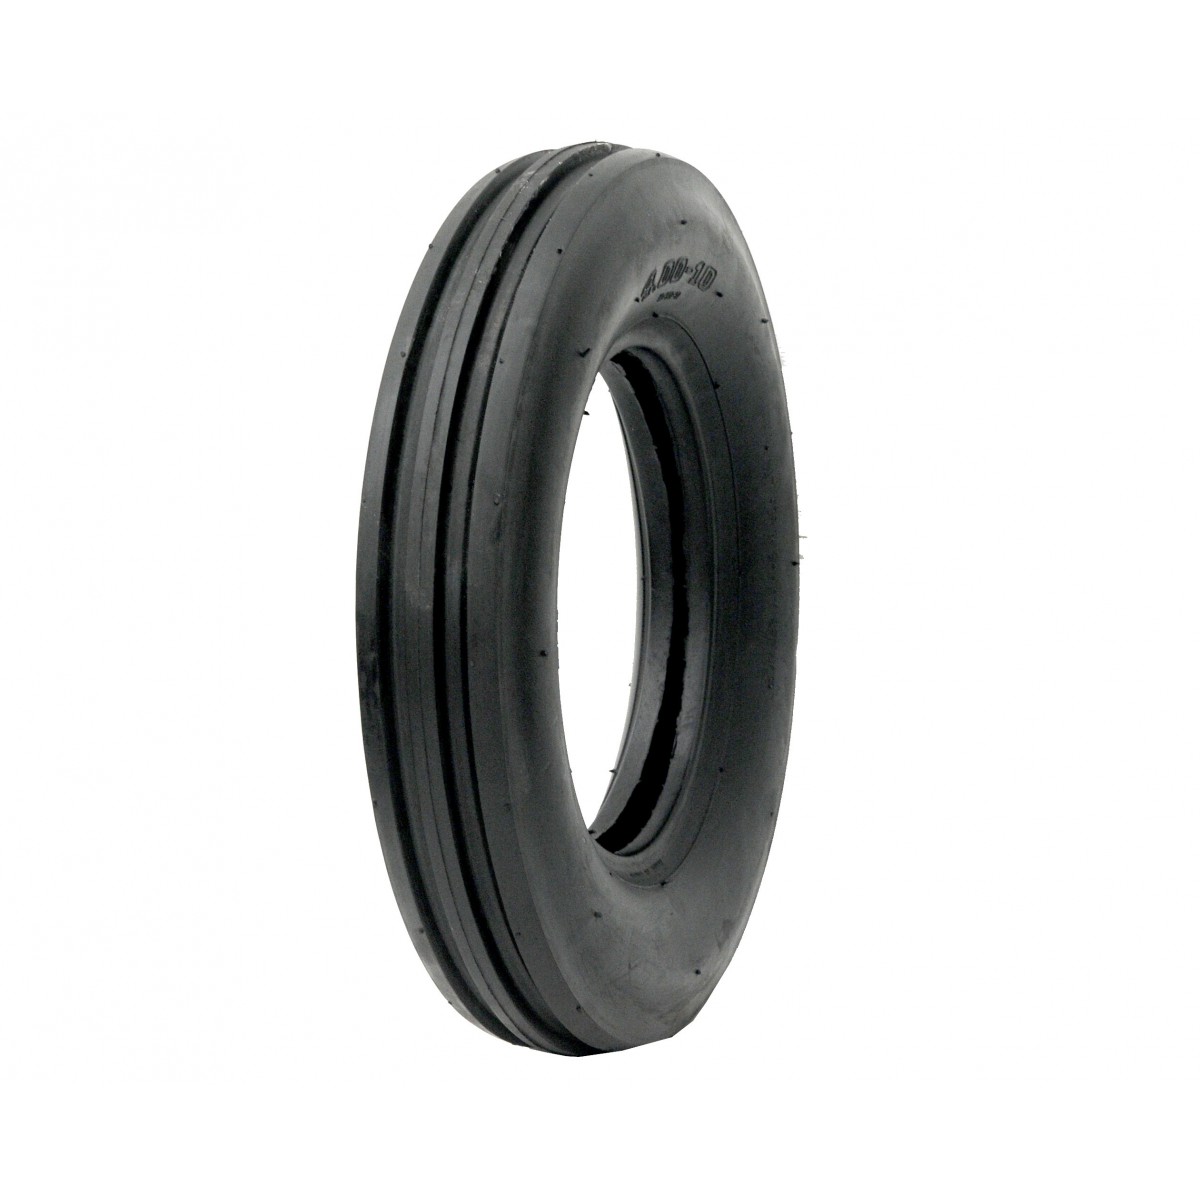 Agricultural tire 4.00-10 4PR 4-10 4x10 SMOOTH